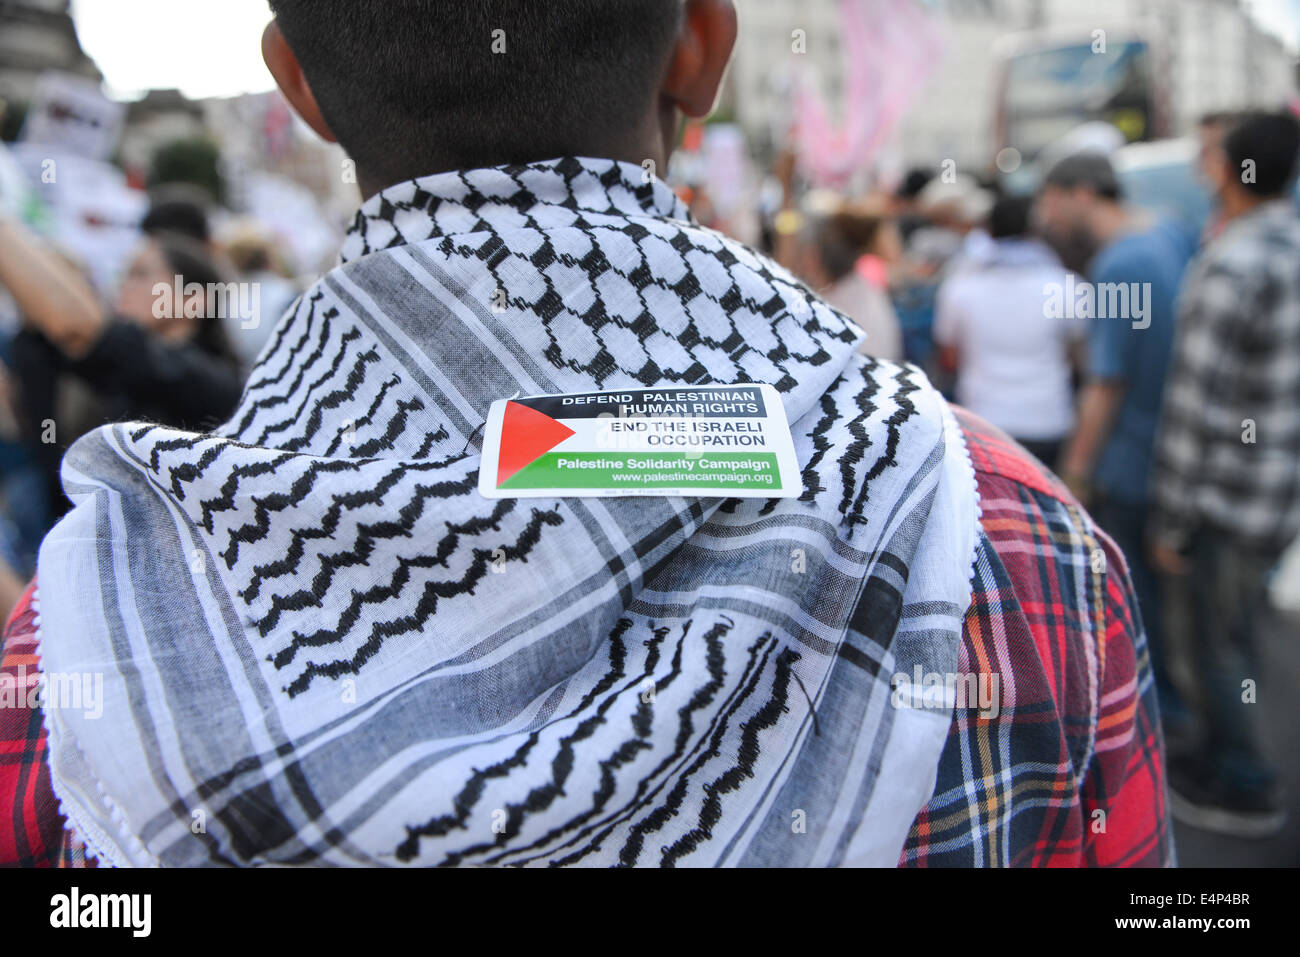 Langham Place, London, UK. 15th July 2014. Pro Palestinian supporters stage a mass protest outside the BBC headquarters in Langham Place, chanting slogans against both Israel and the BBC itself. Credit:  Matthew Chattle/Alamy Live News Stock Photo